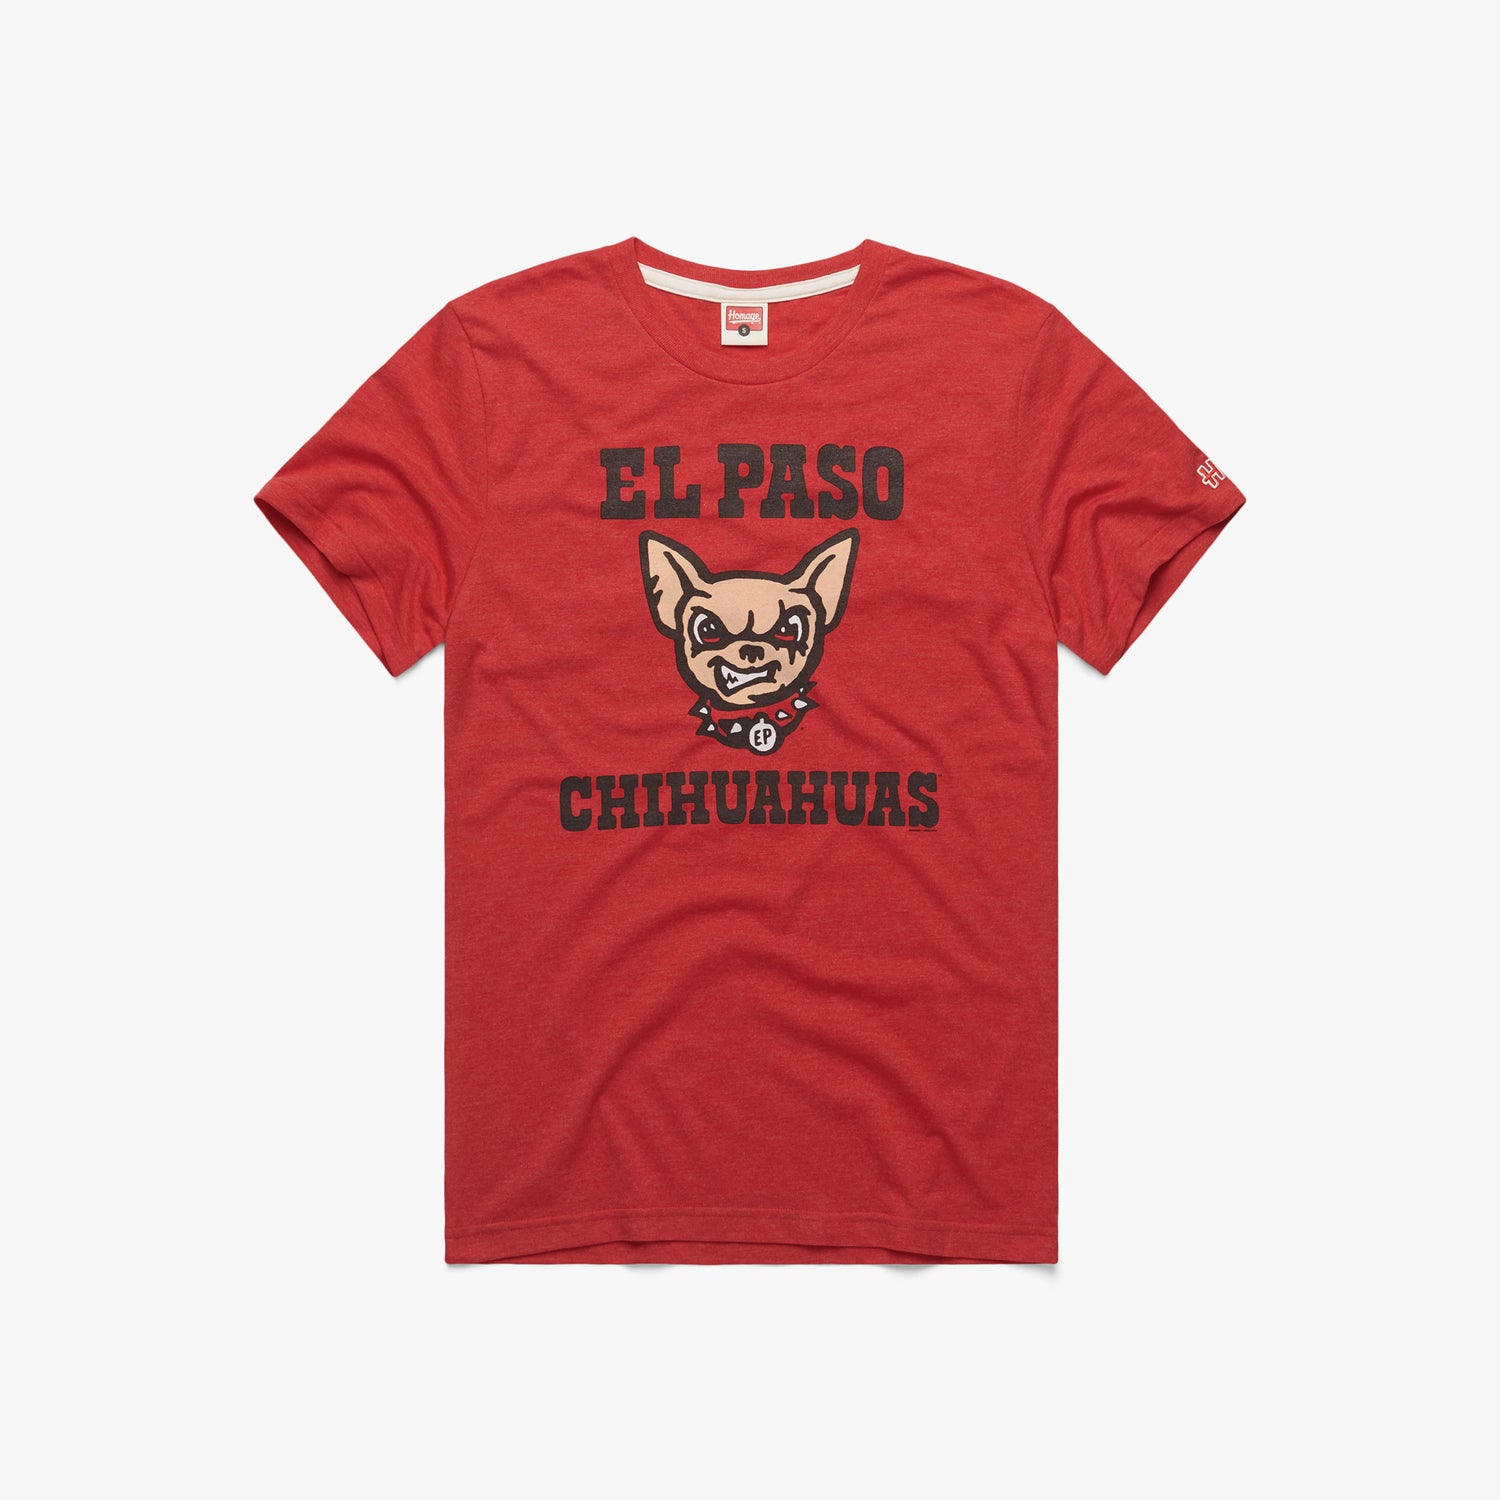 El Paso Chihuahuas T-Shirt from Homage. | Red | Vintage Apparel from Homage.